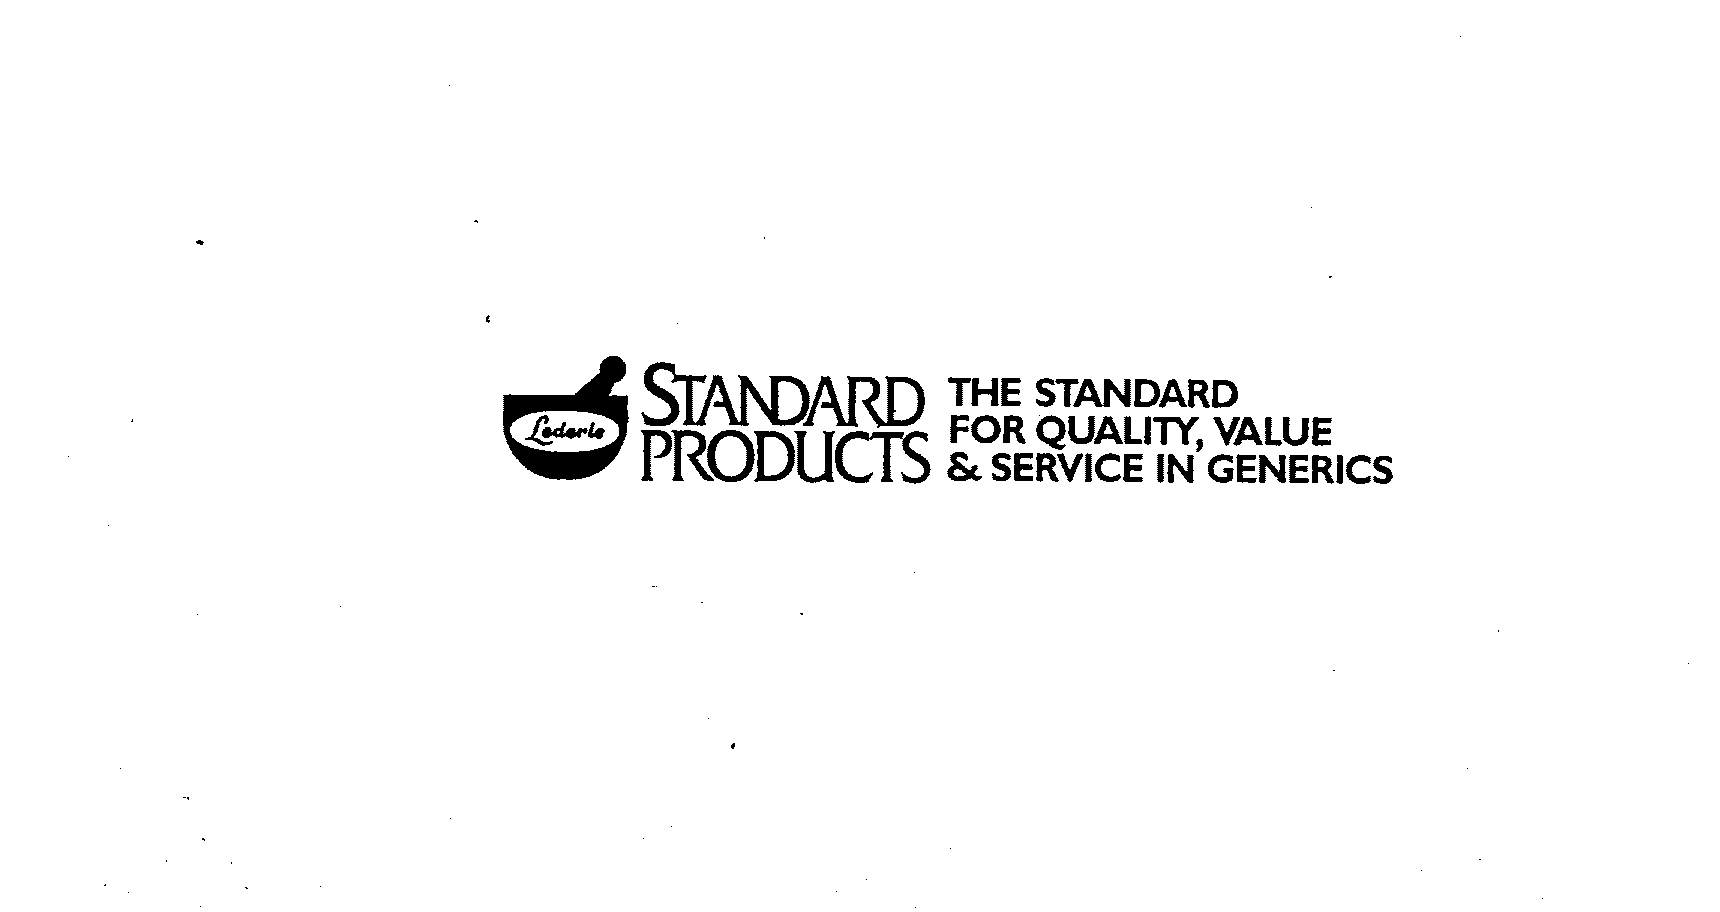  LEDERLE STANDARD PRODUCTS THE STANDARD FOR QUALITY, VALVE &amp; SERVICE IN GENERICS